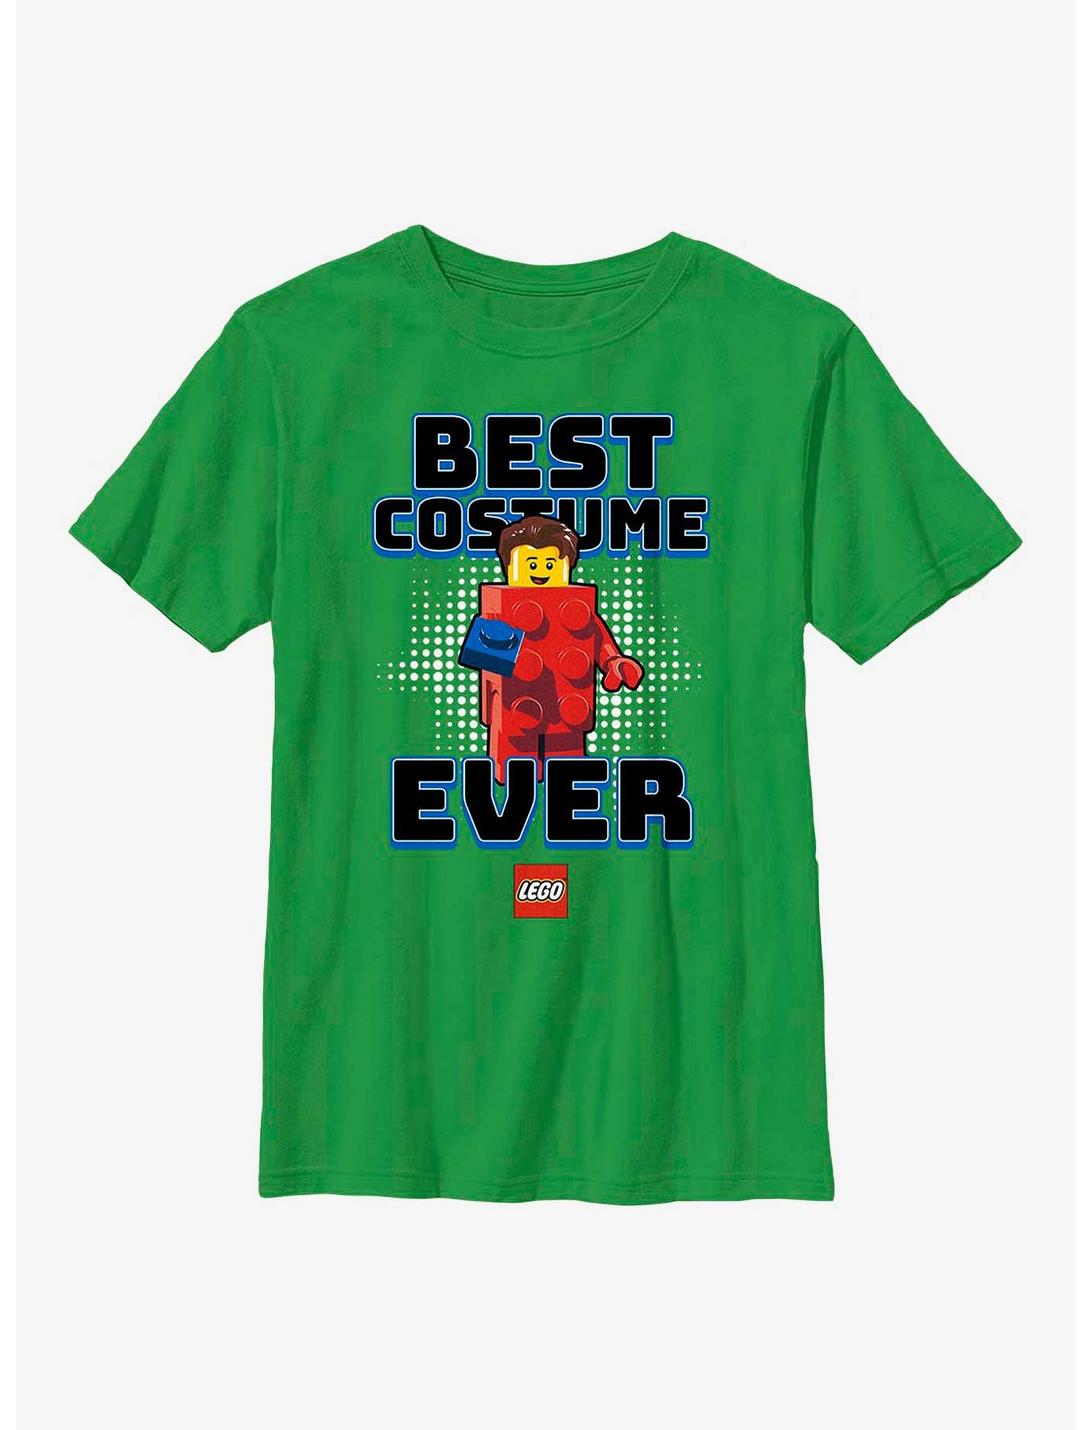 LEGO Best Costume Ever Youth T-Shirt, KELLY, hi-res